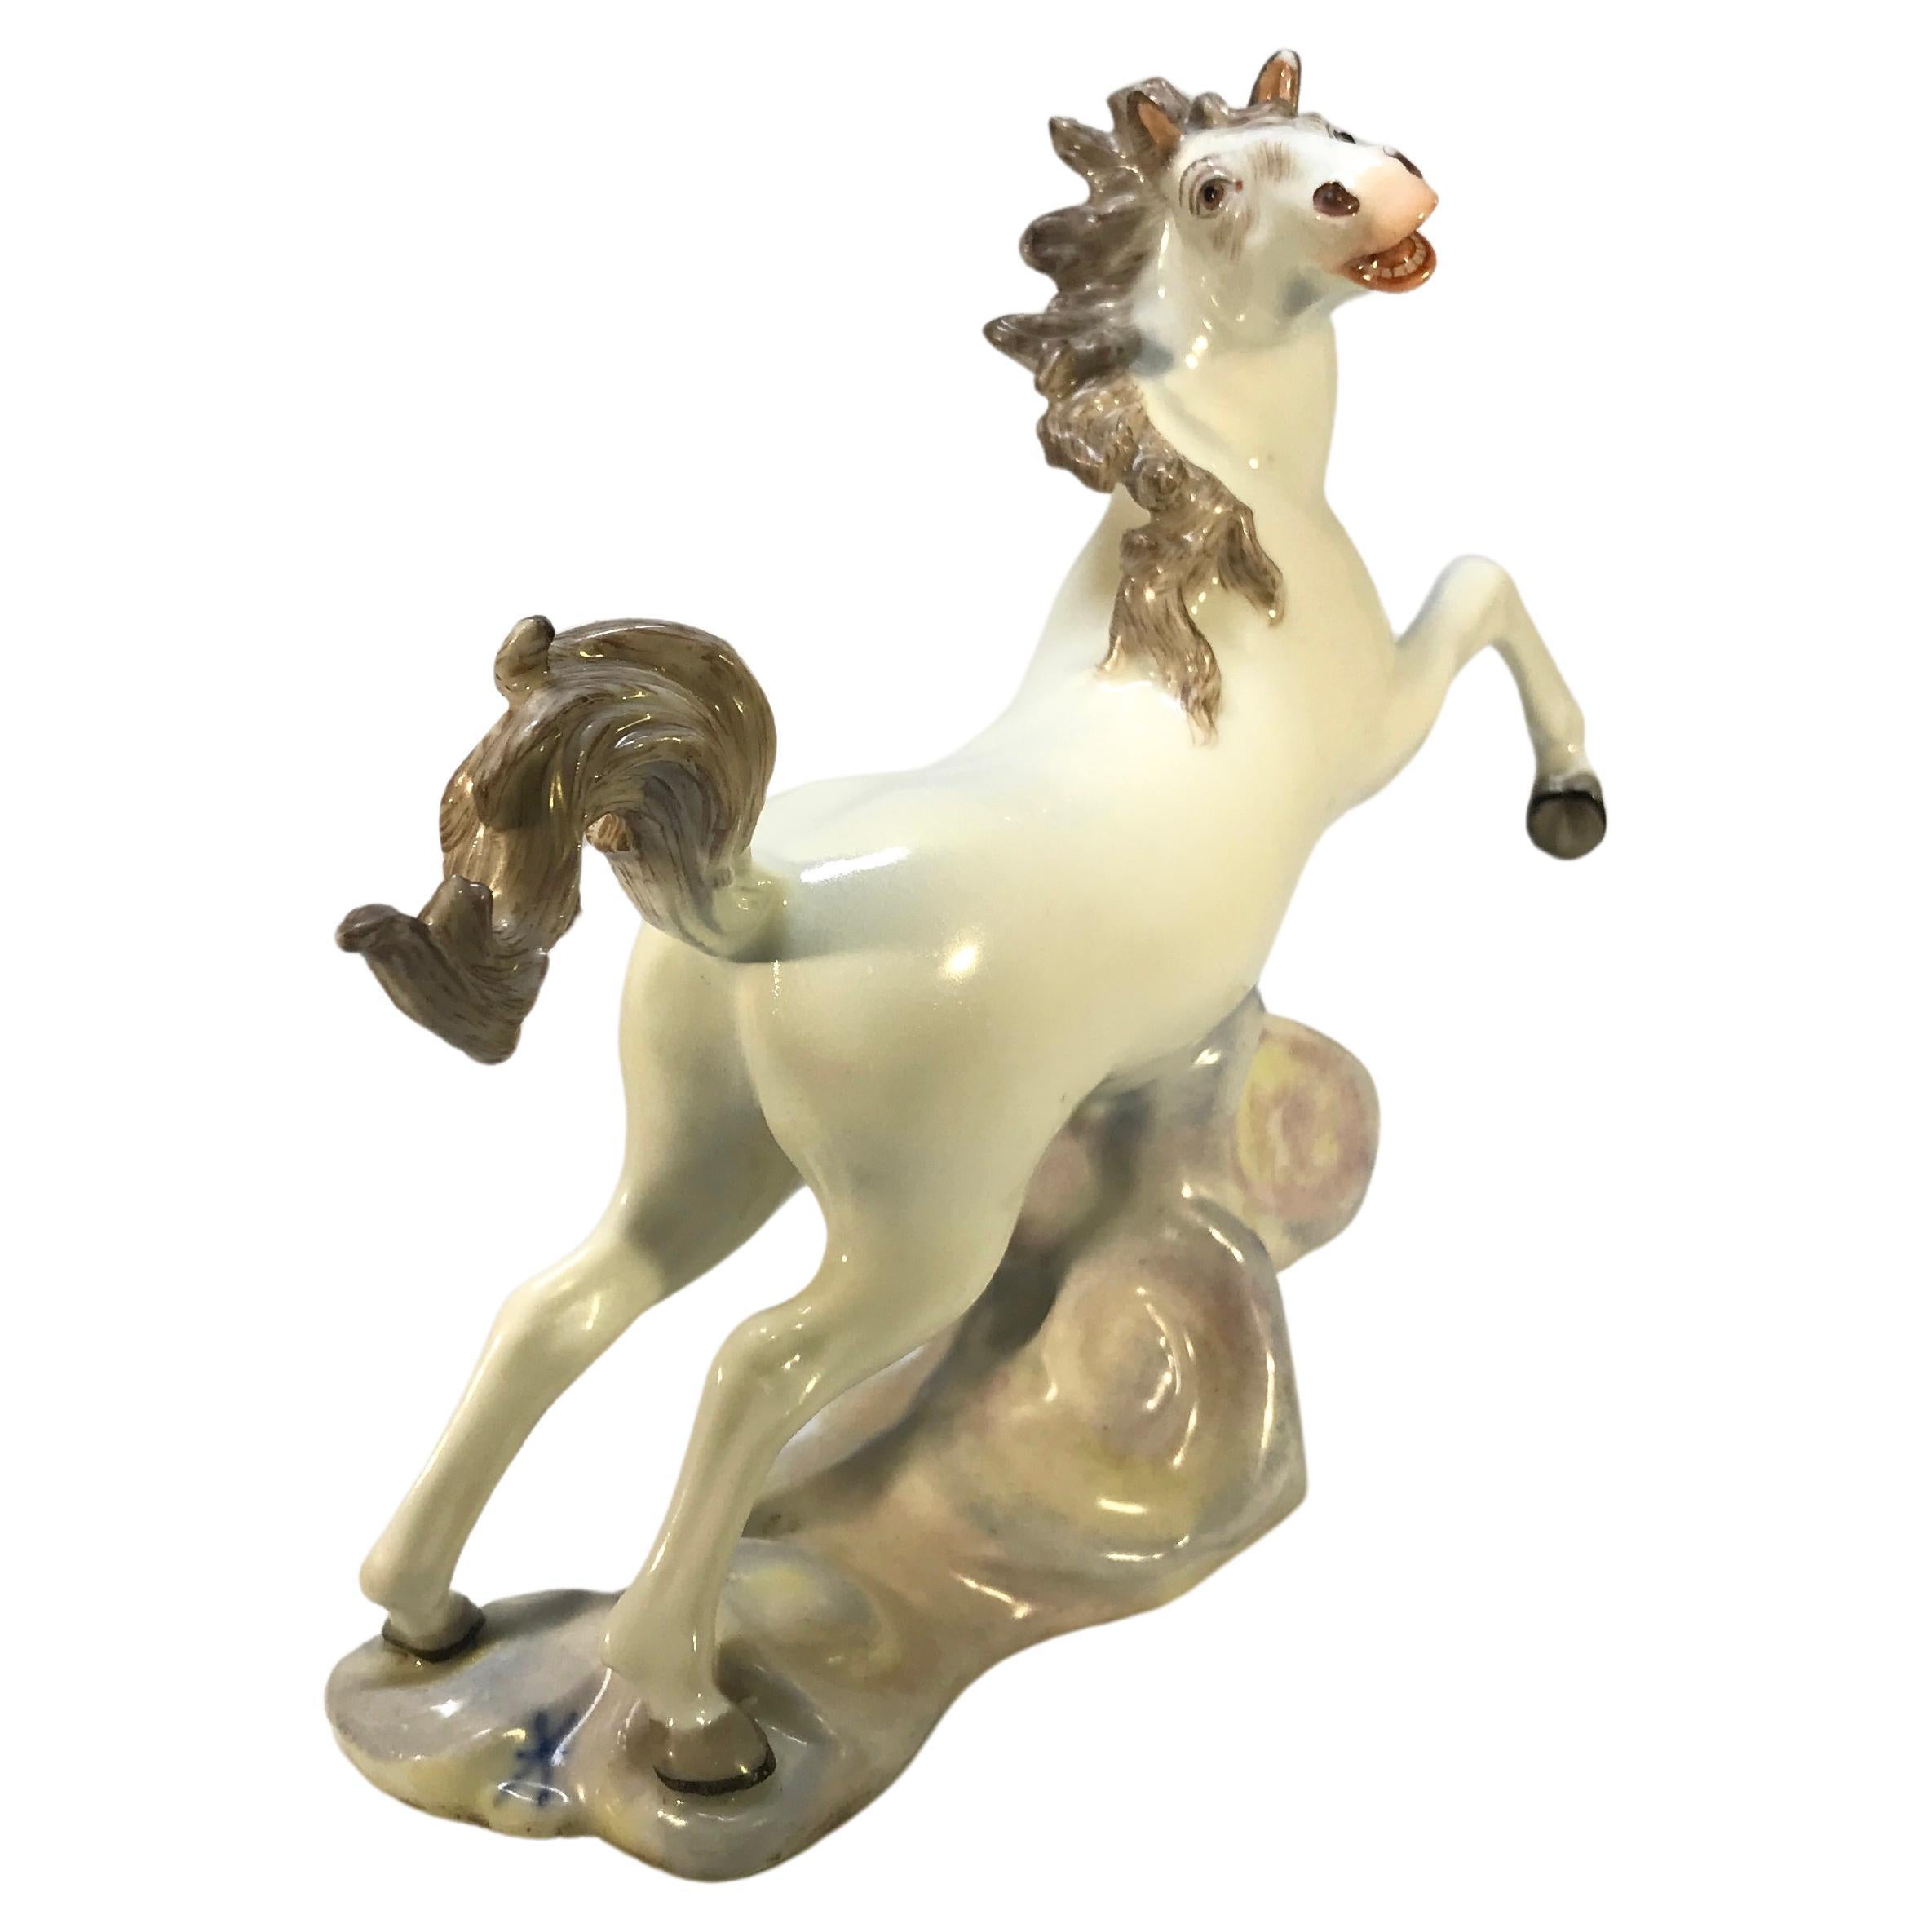 Lively Continental White Porcelain Hand Painted Prancing Horse Figure Samson For Sale